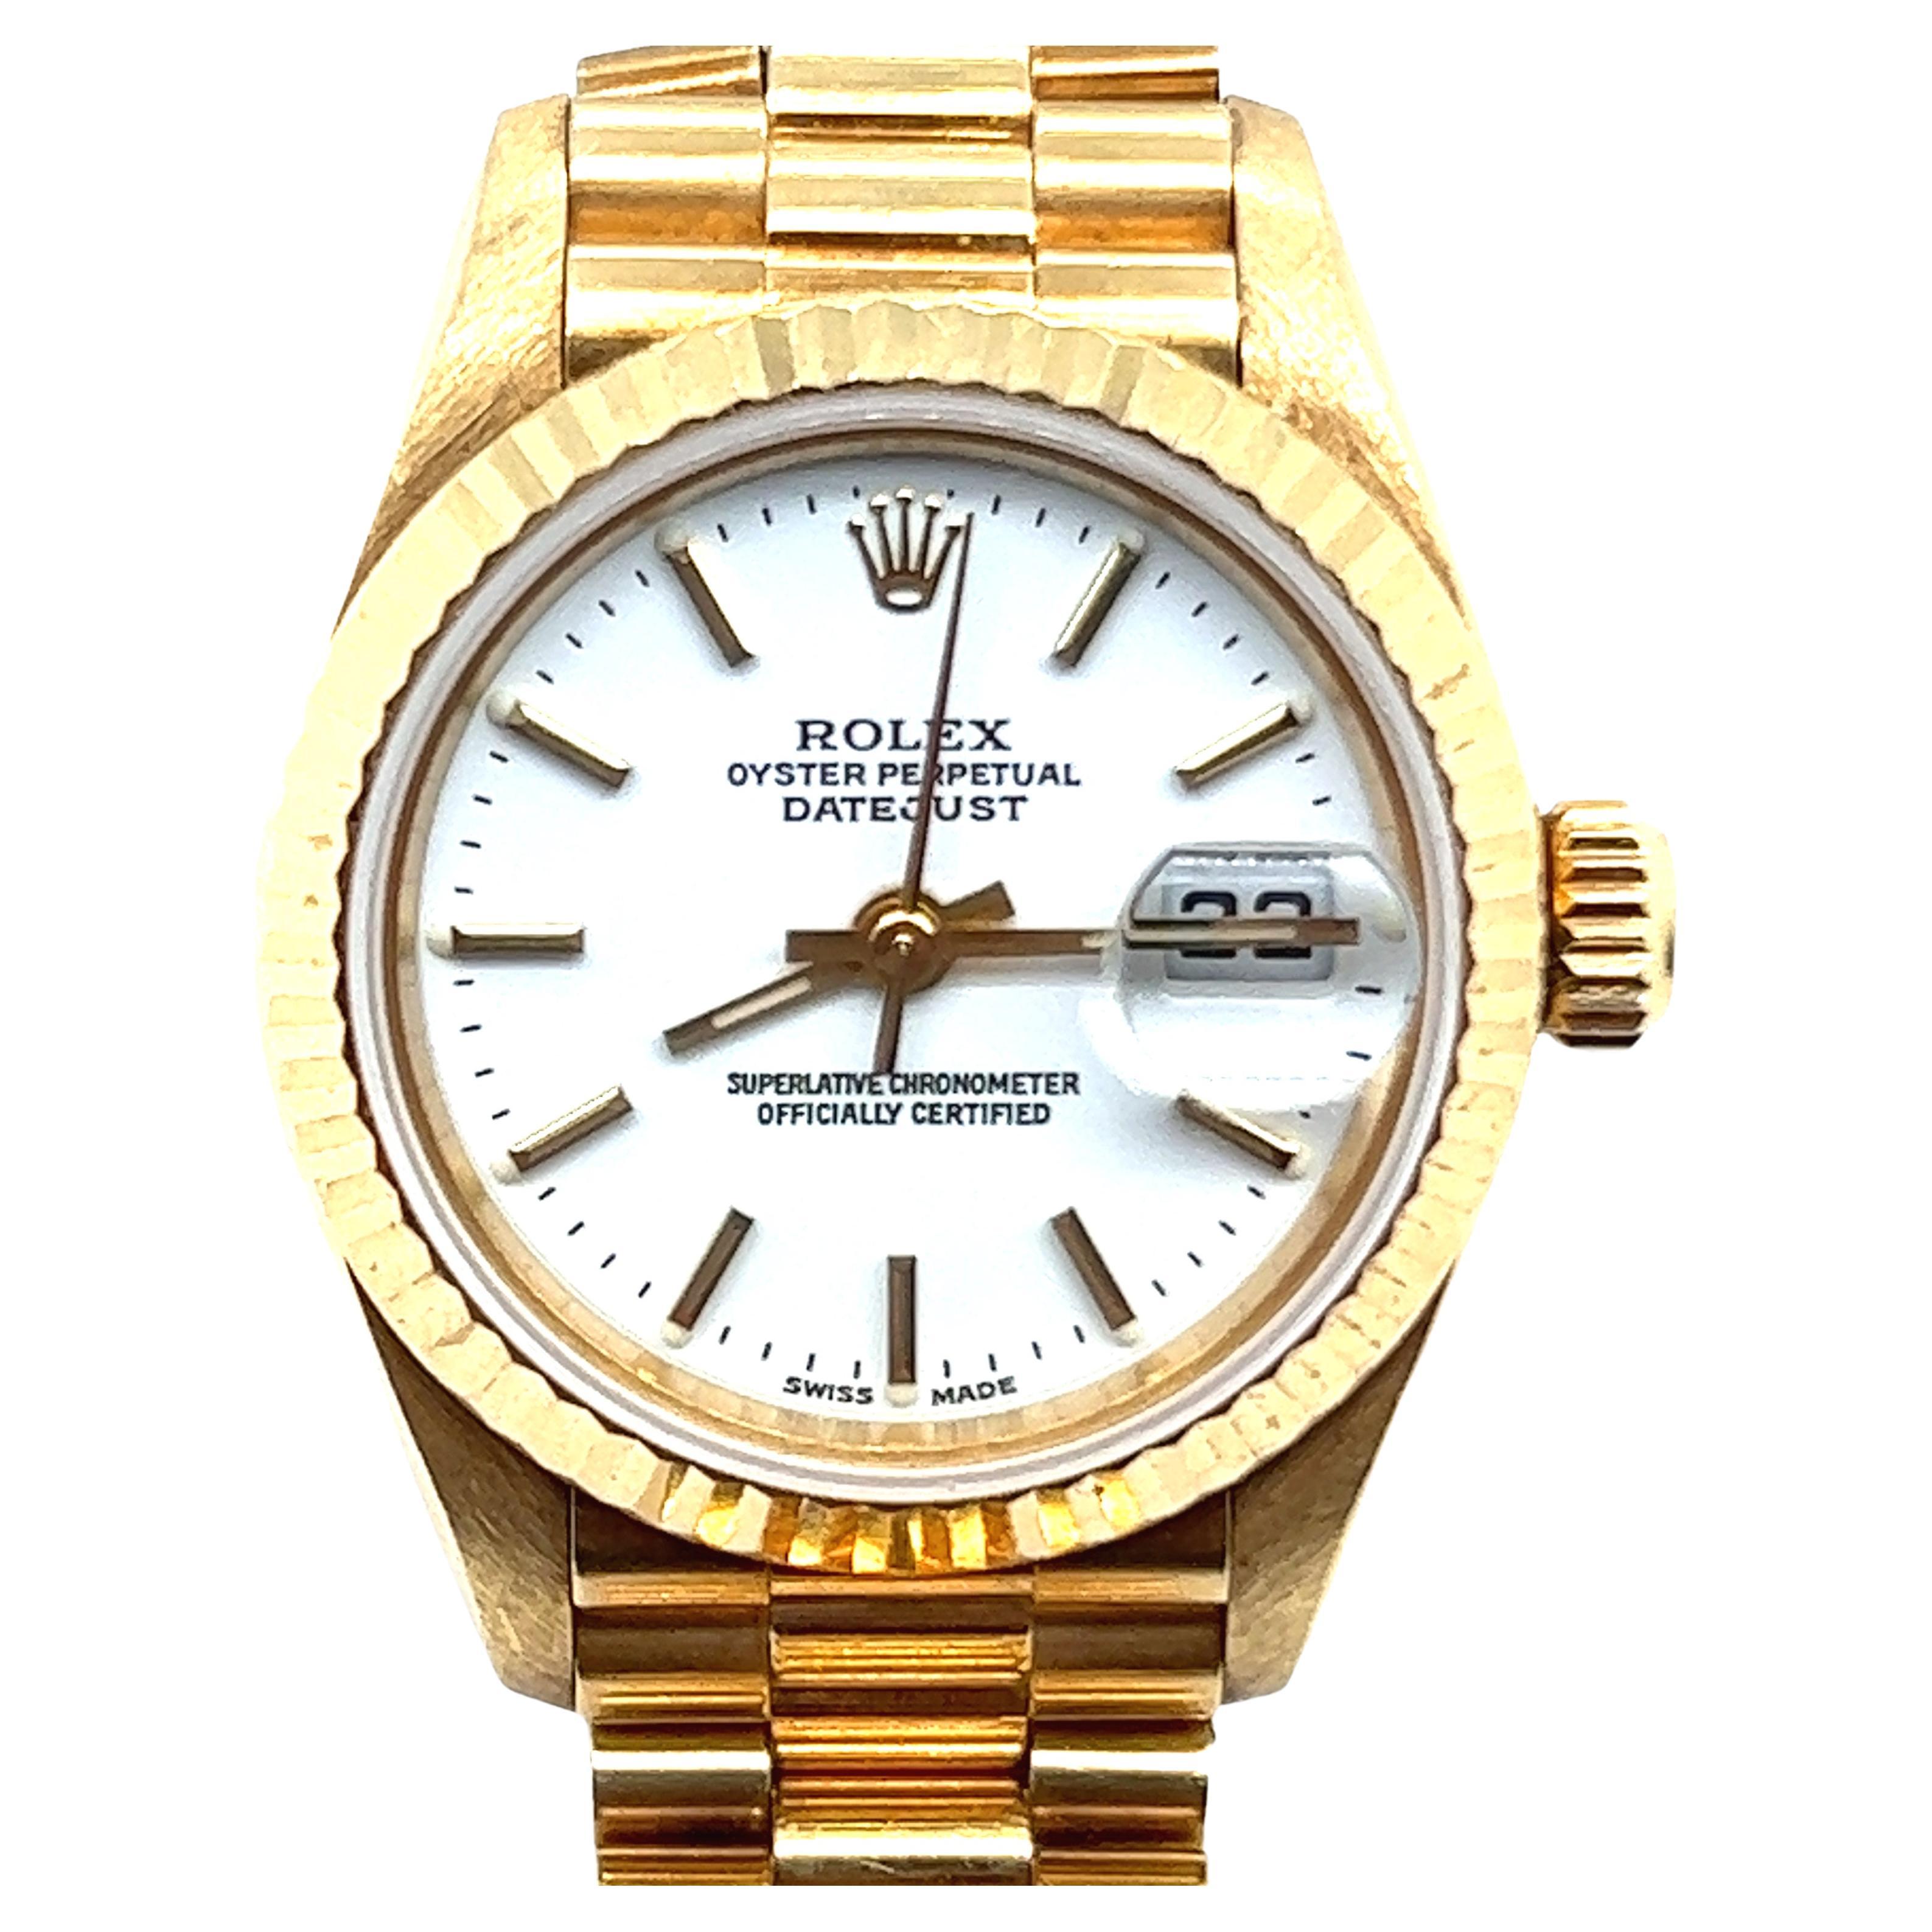 Rolex President Datejust is an ultimate classic.

While gold watches are traditionally saved for formal occasion, the modern collectors deems them as suitable everyday watches.

This timeless model has 18 Karat yellow gold oyster case 26.00 mm in